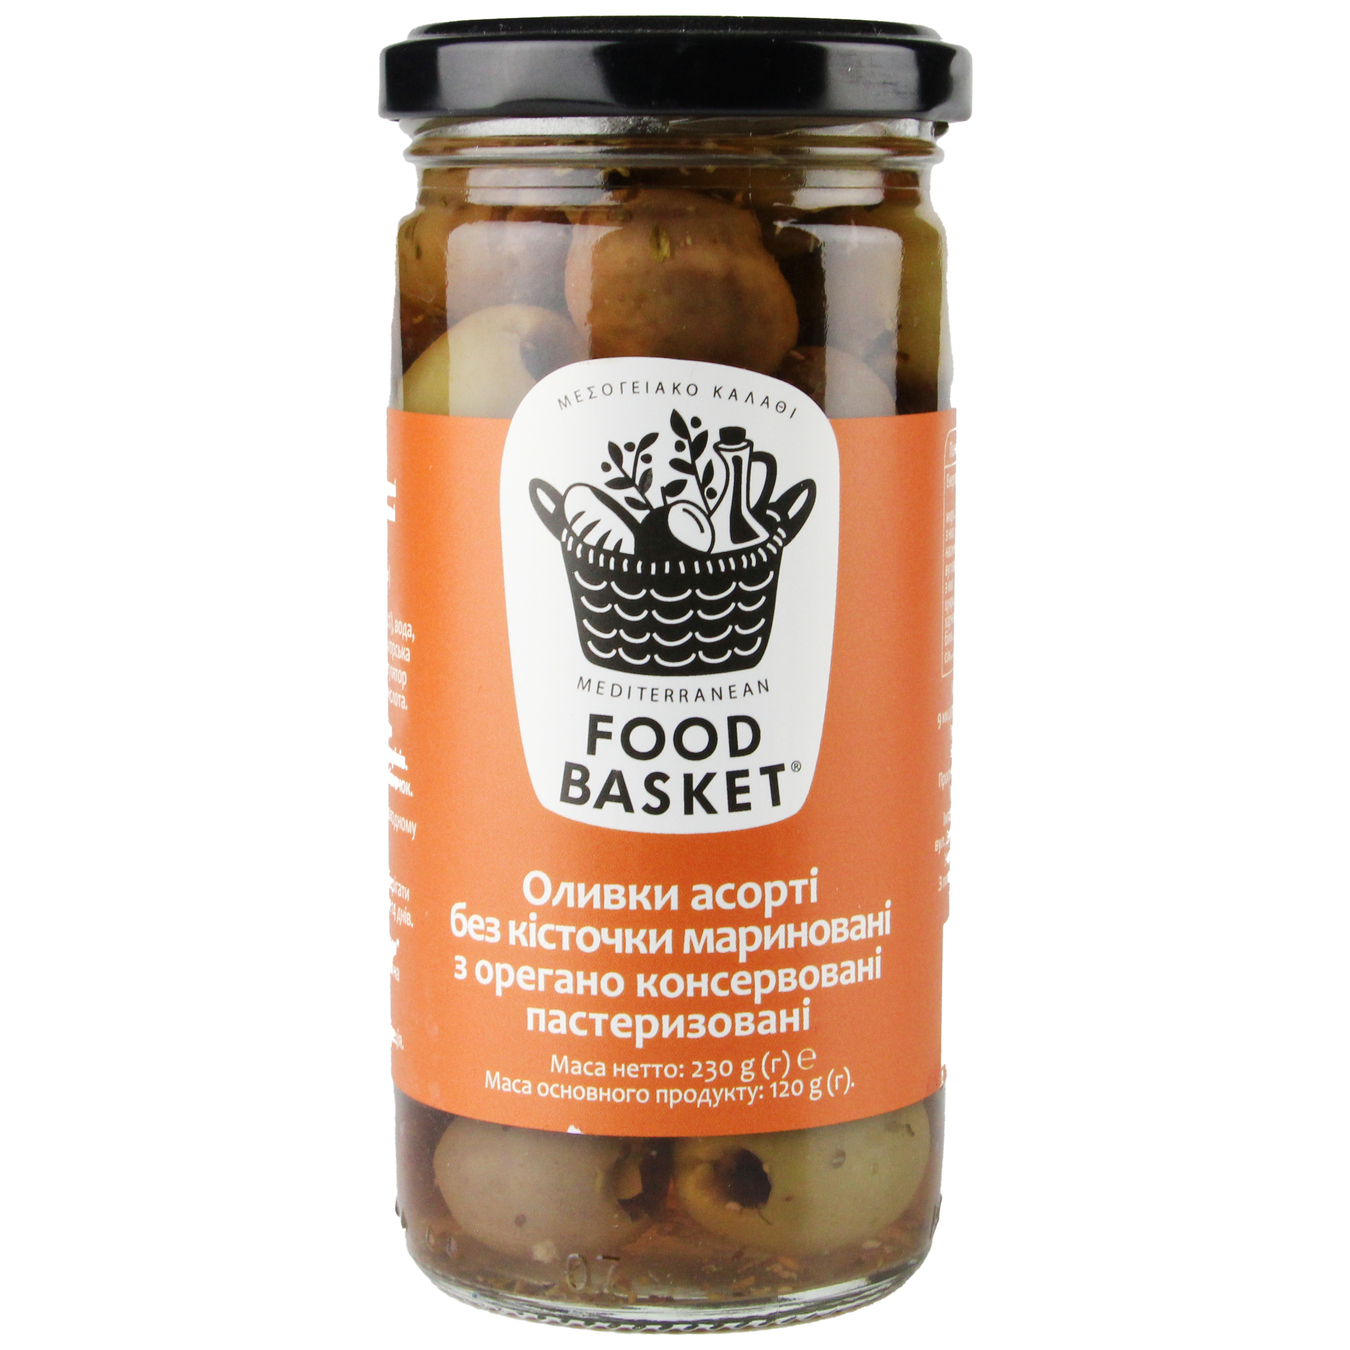 Food Basket Pitted Marinated With Oregano Pasteurized Olives 260g